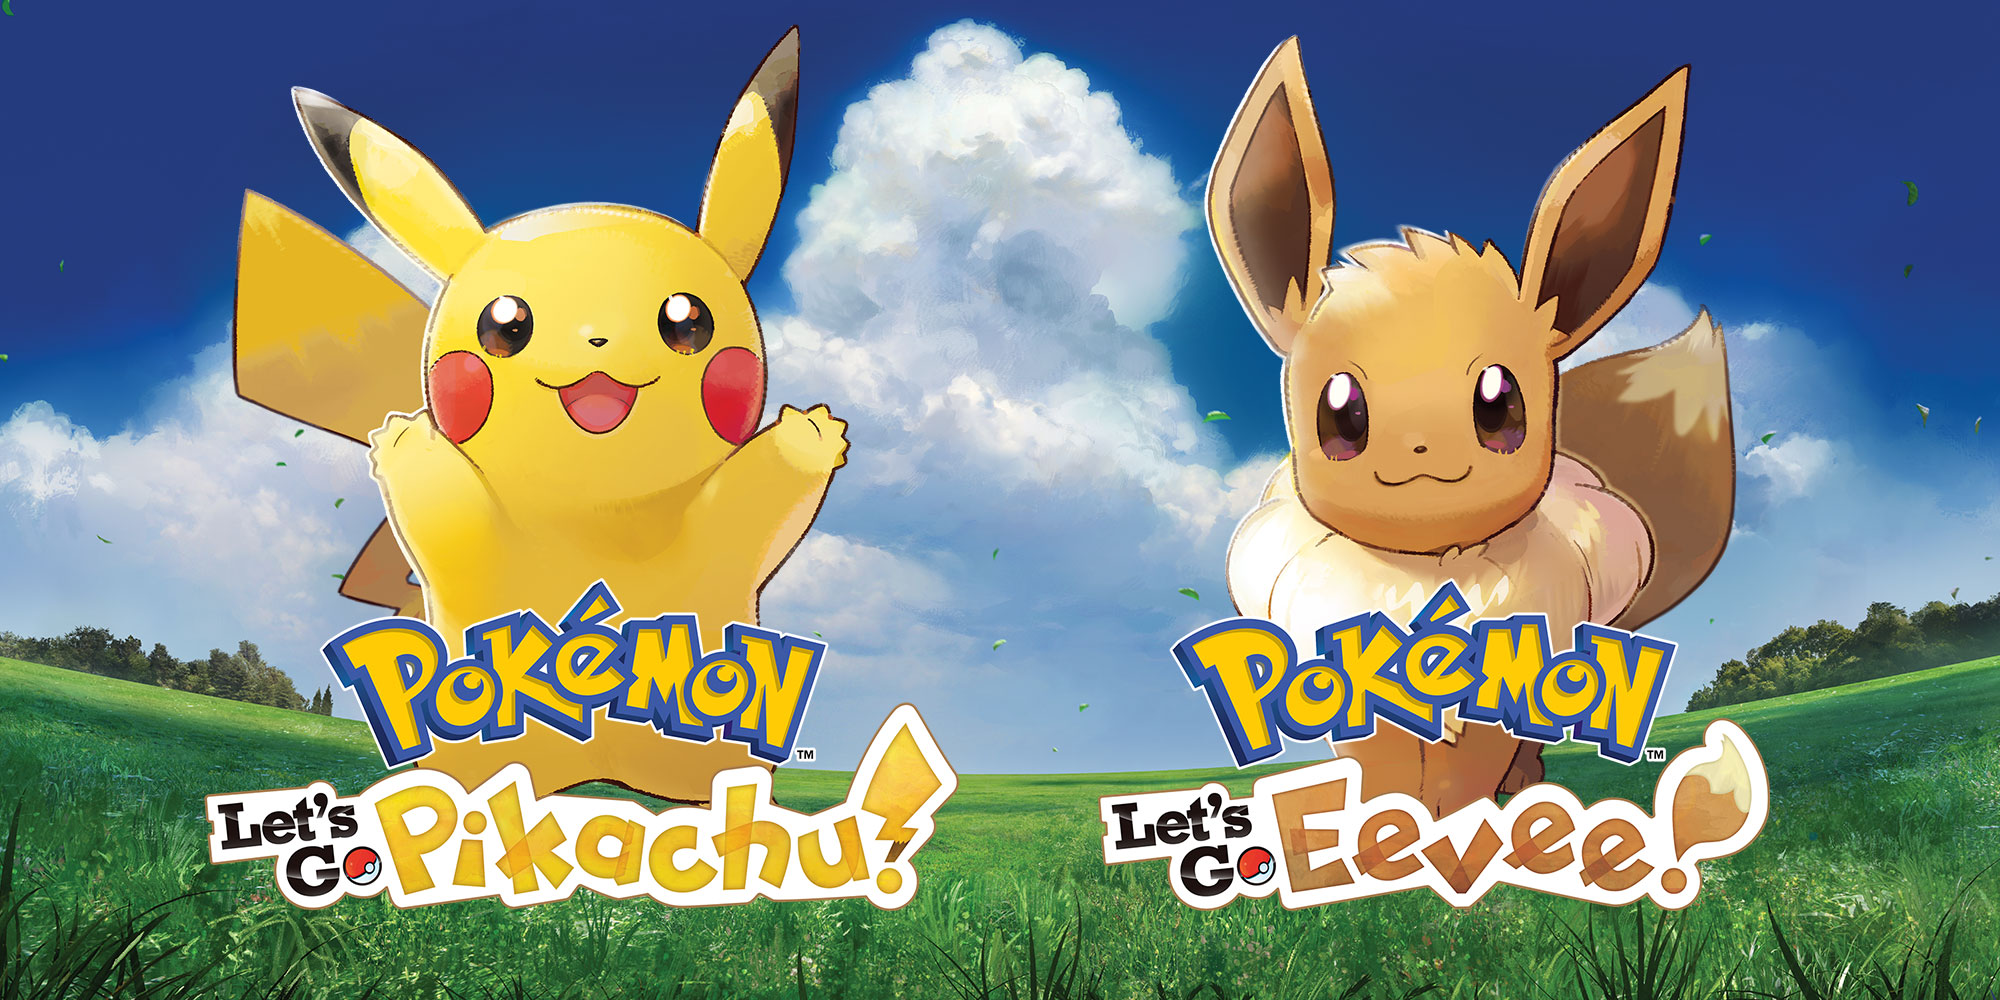 Pokémon: Let's Go Pikachu & Eevee! review – a children's classic, refreshed, Games